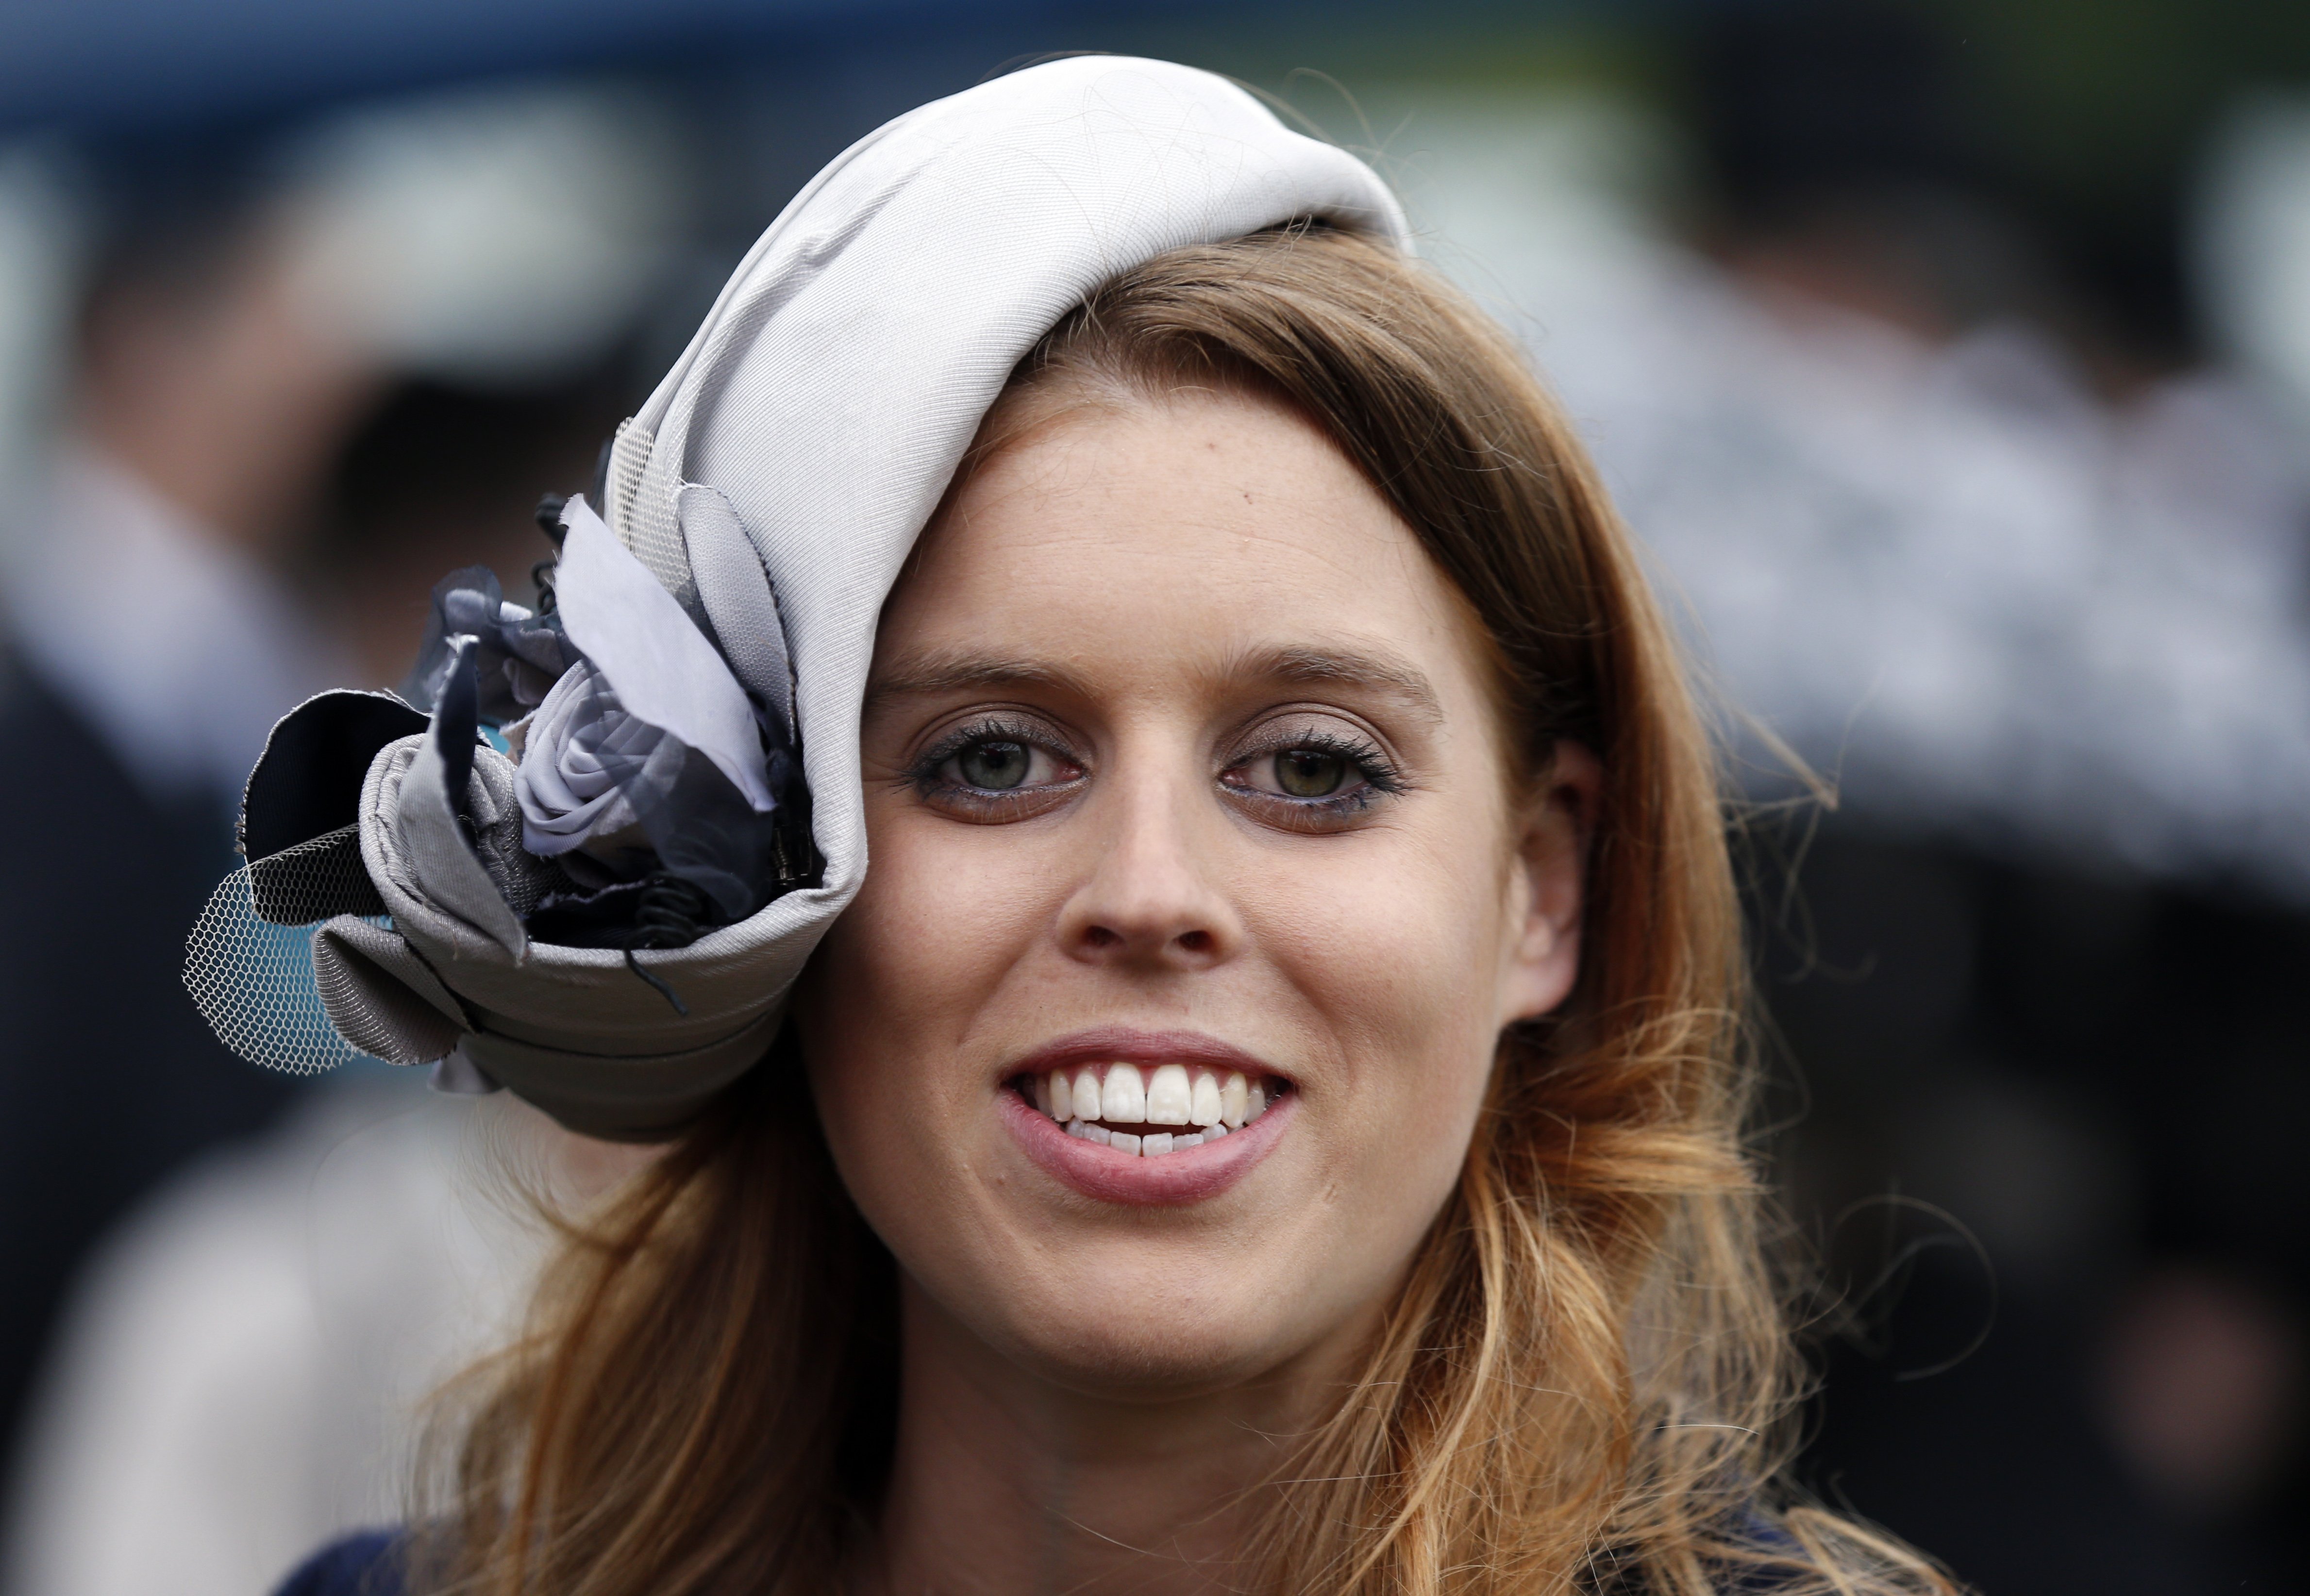 Princess Beatrice smiles during a garden party held at Buckingham Palace, on May 30, 2013 in London, England. | Source: Getty Images